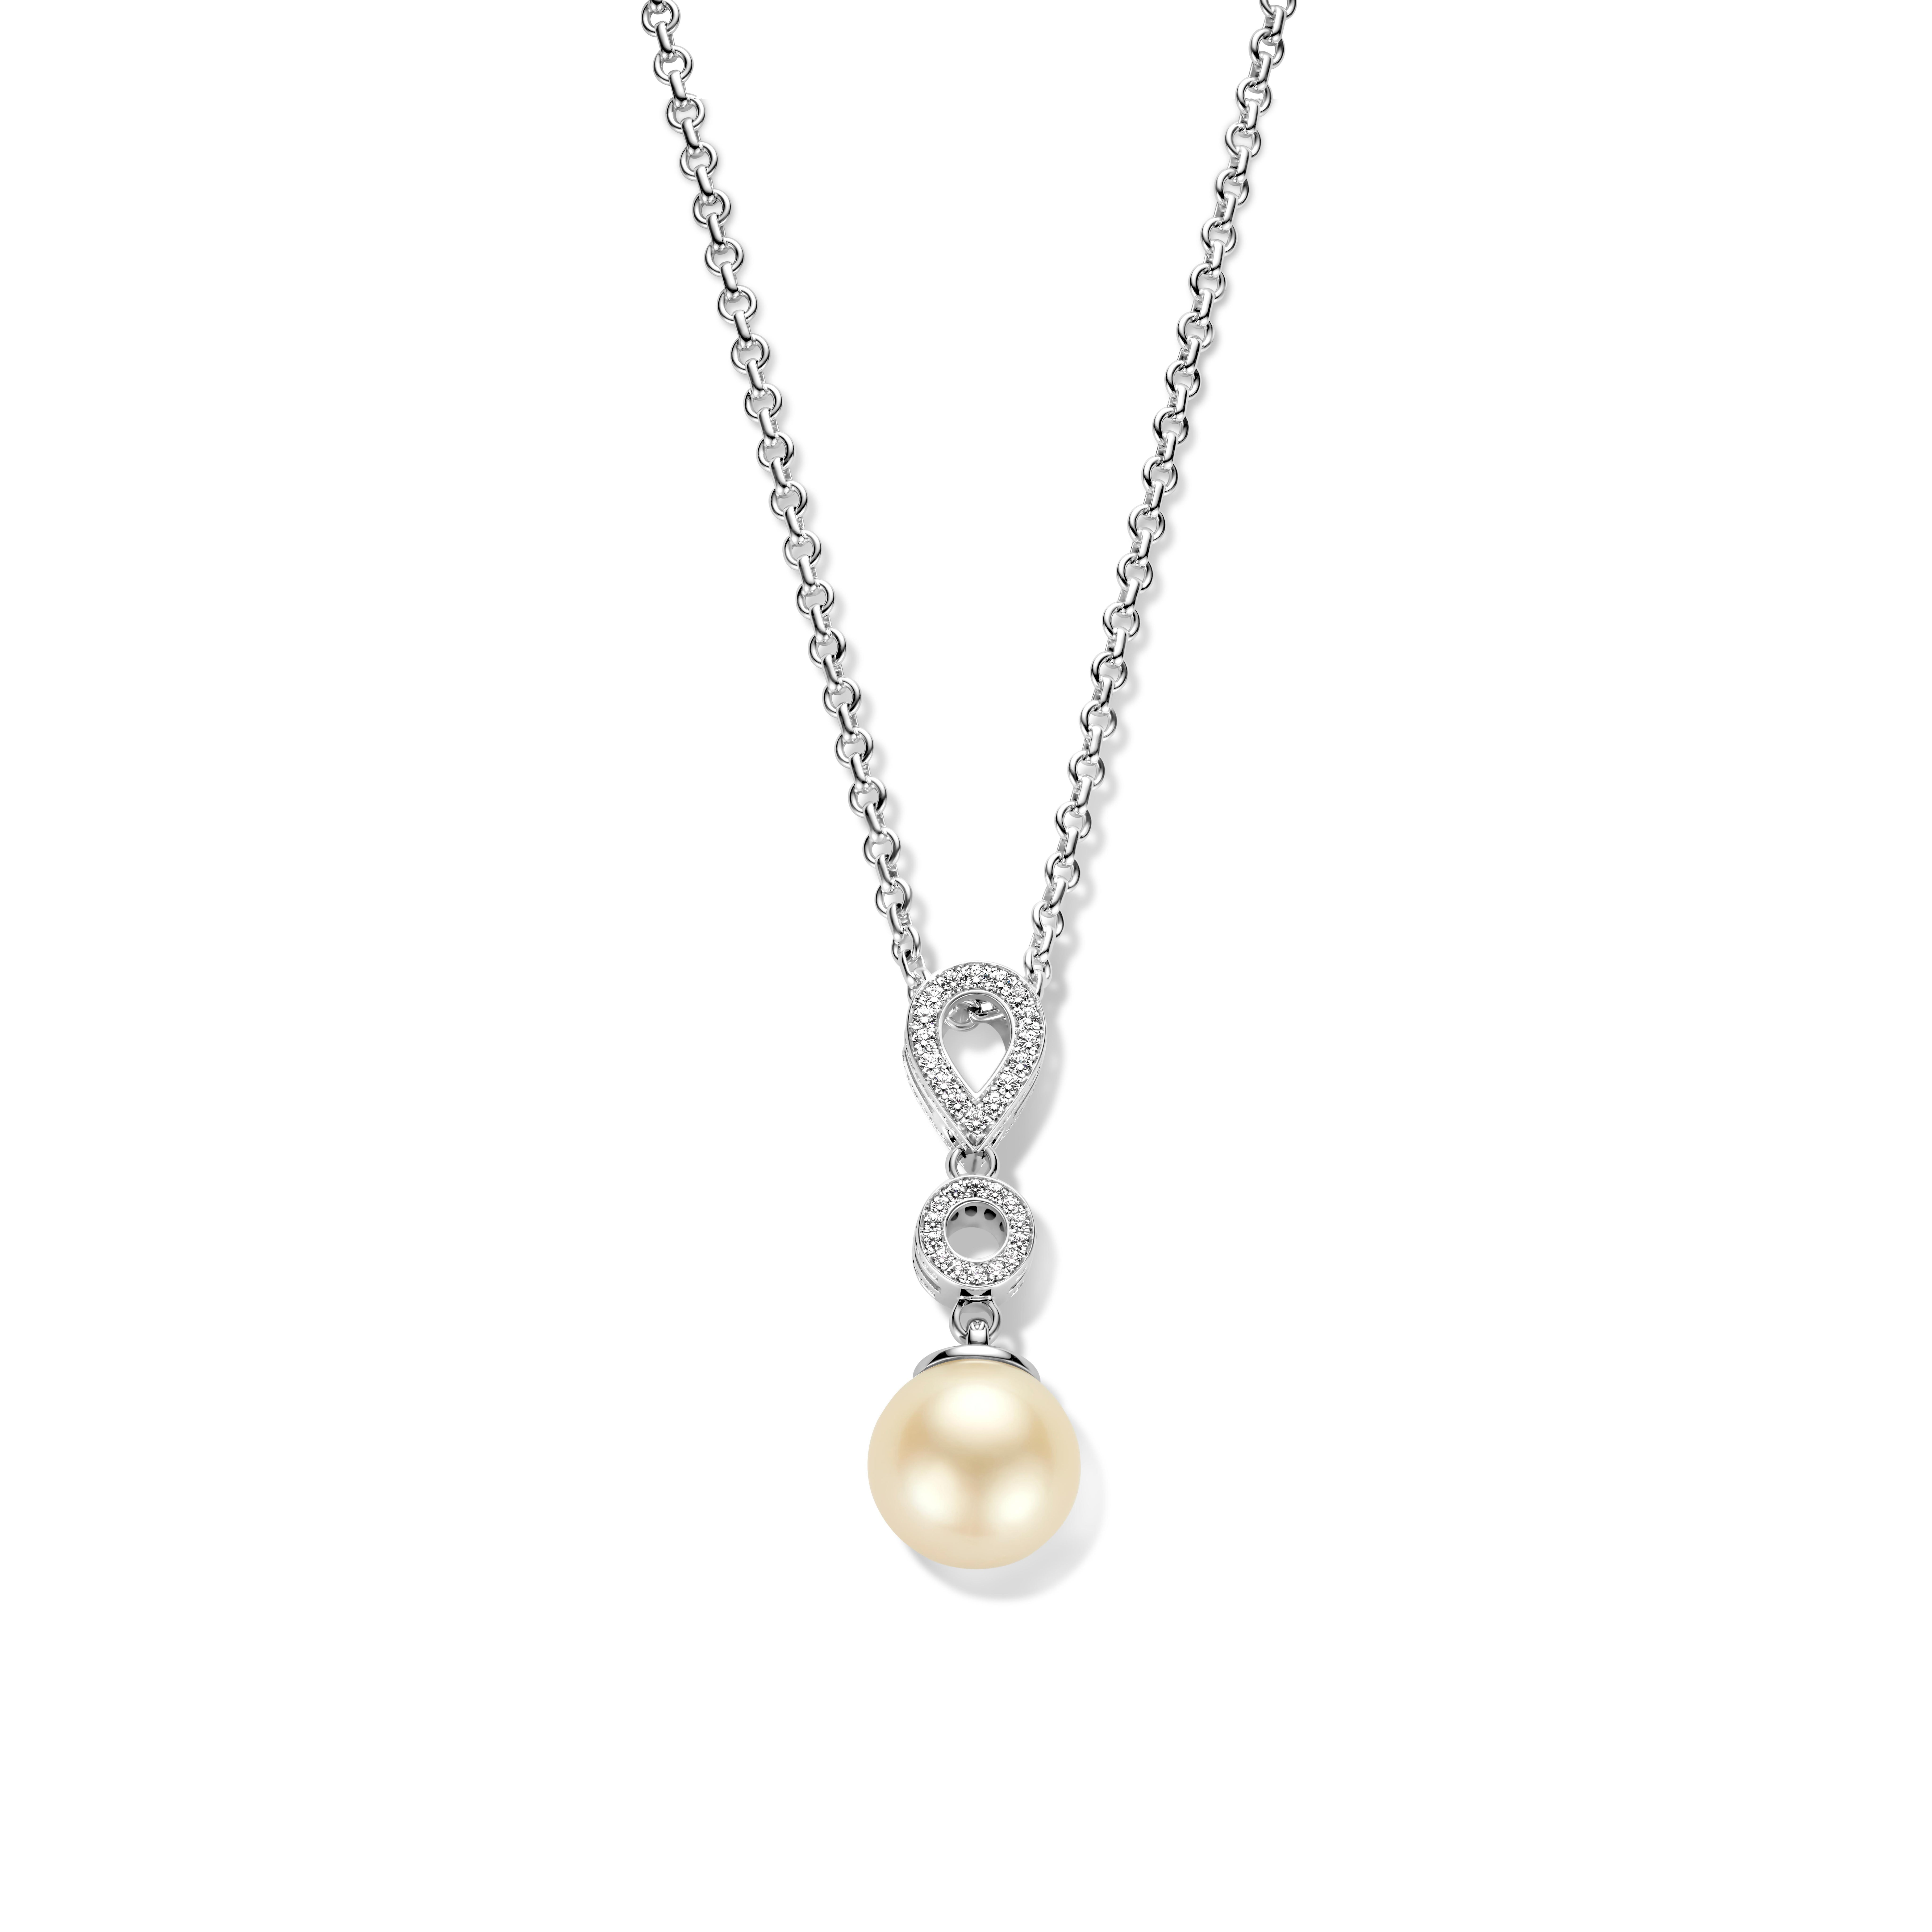 XL Natural South Sea Pearl And Diamond White Gold Pendant Necklace